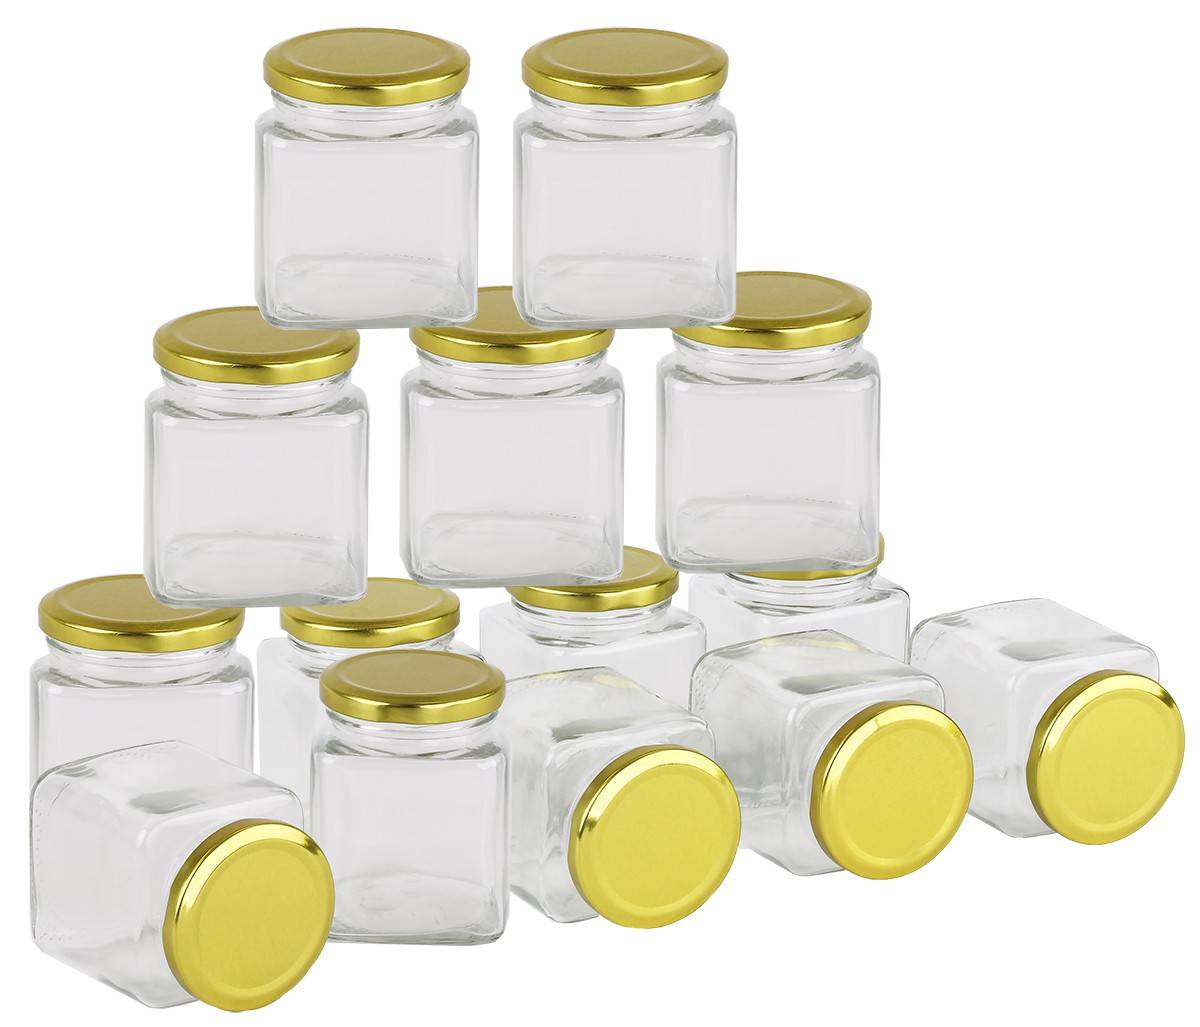 Pallet of 2,856 Square Glass Jars -  280ml / 400gm size - with Lids. GST Incl.